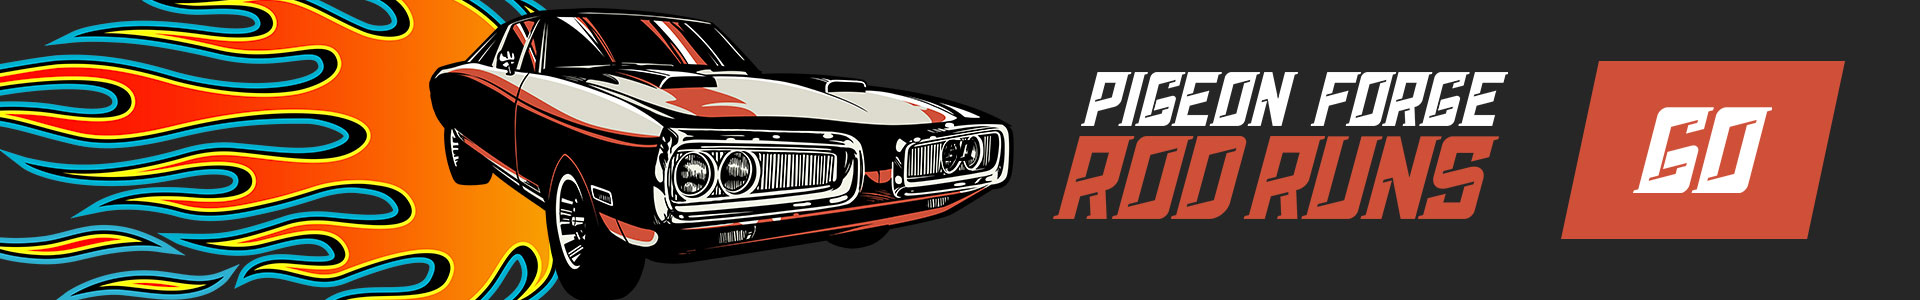 Pigeon Forge Rod Runs - Click for car show schedule